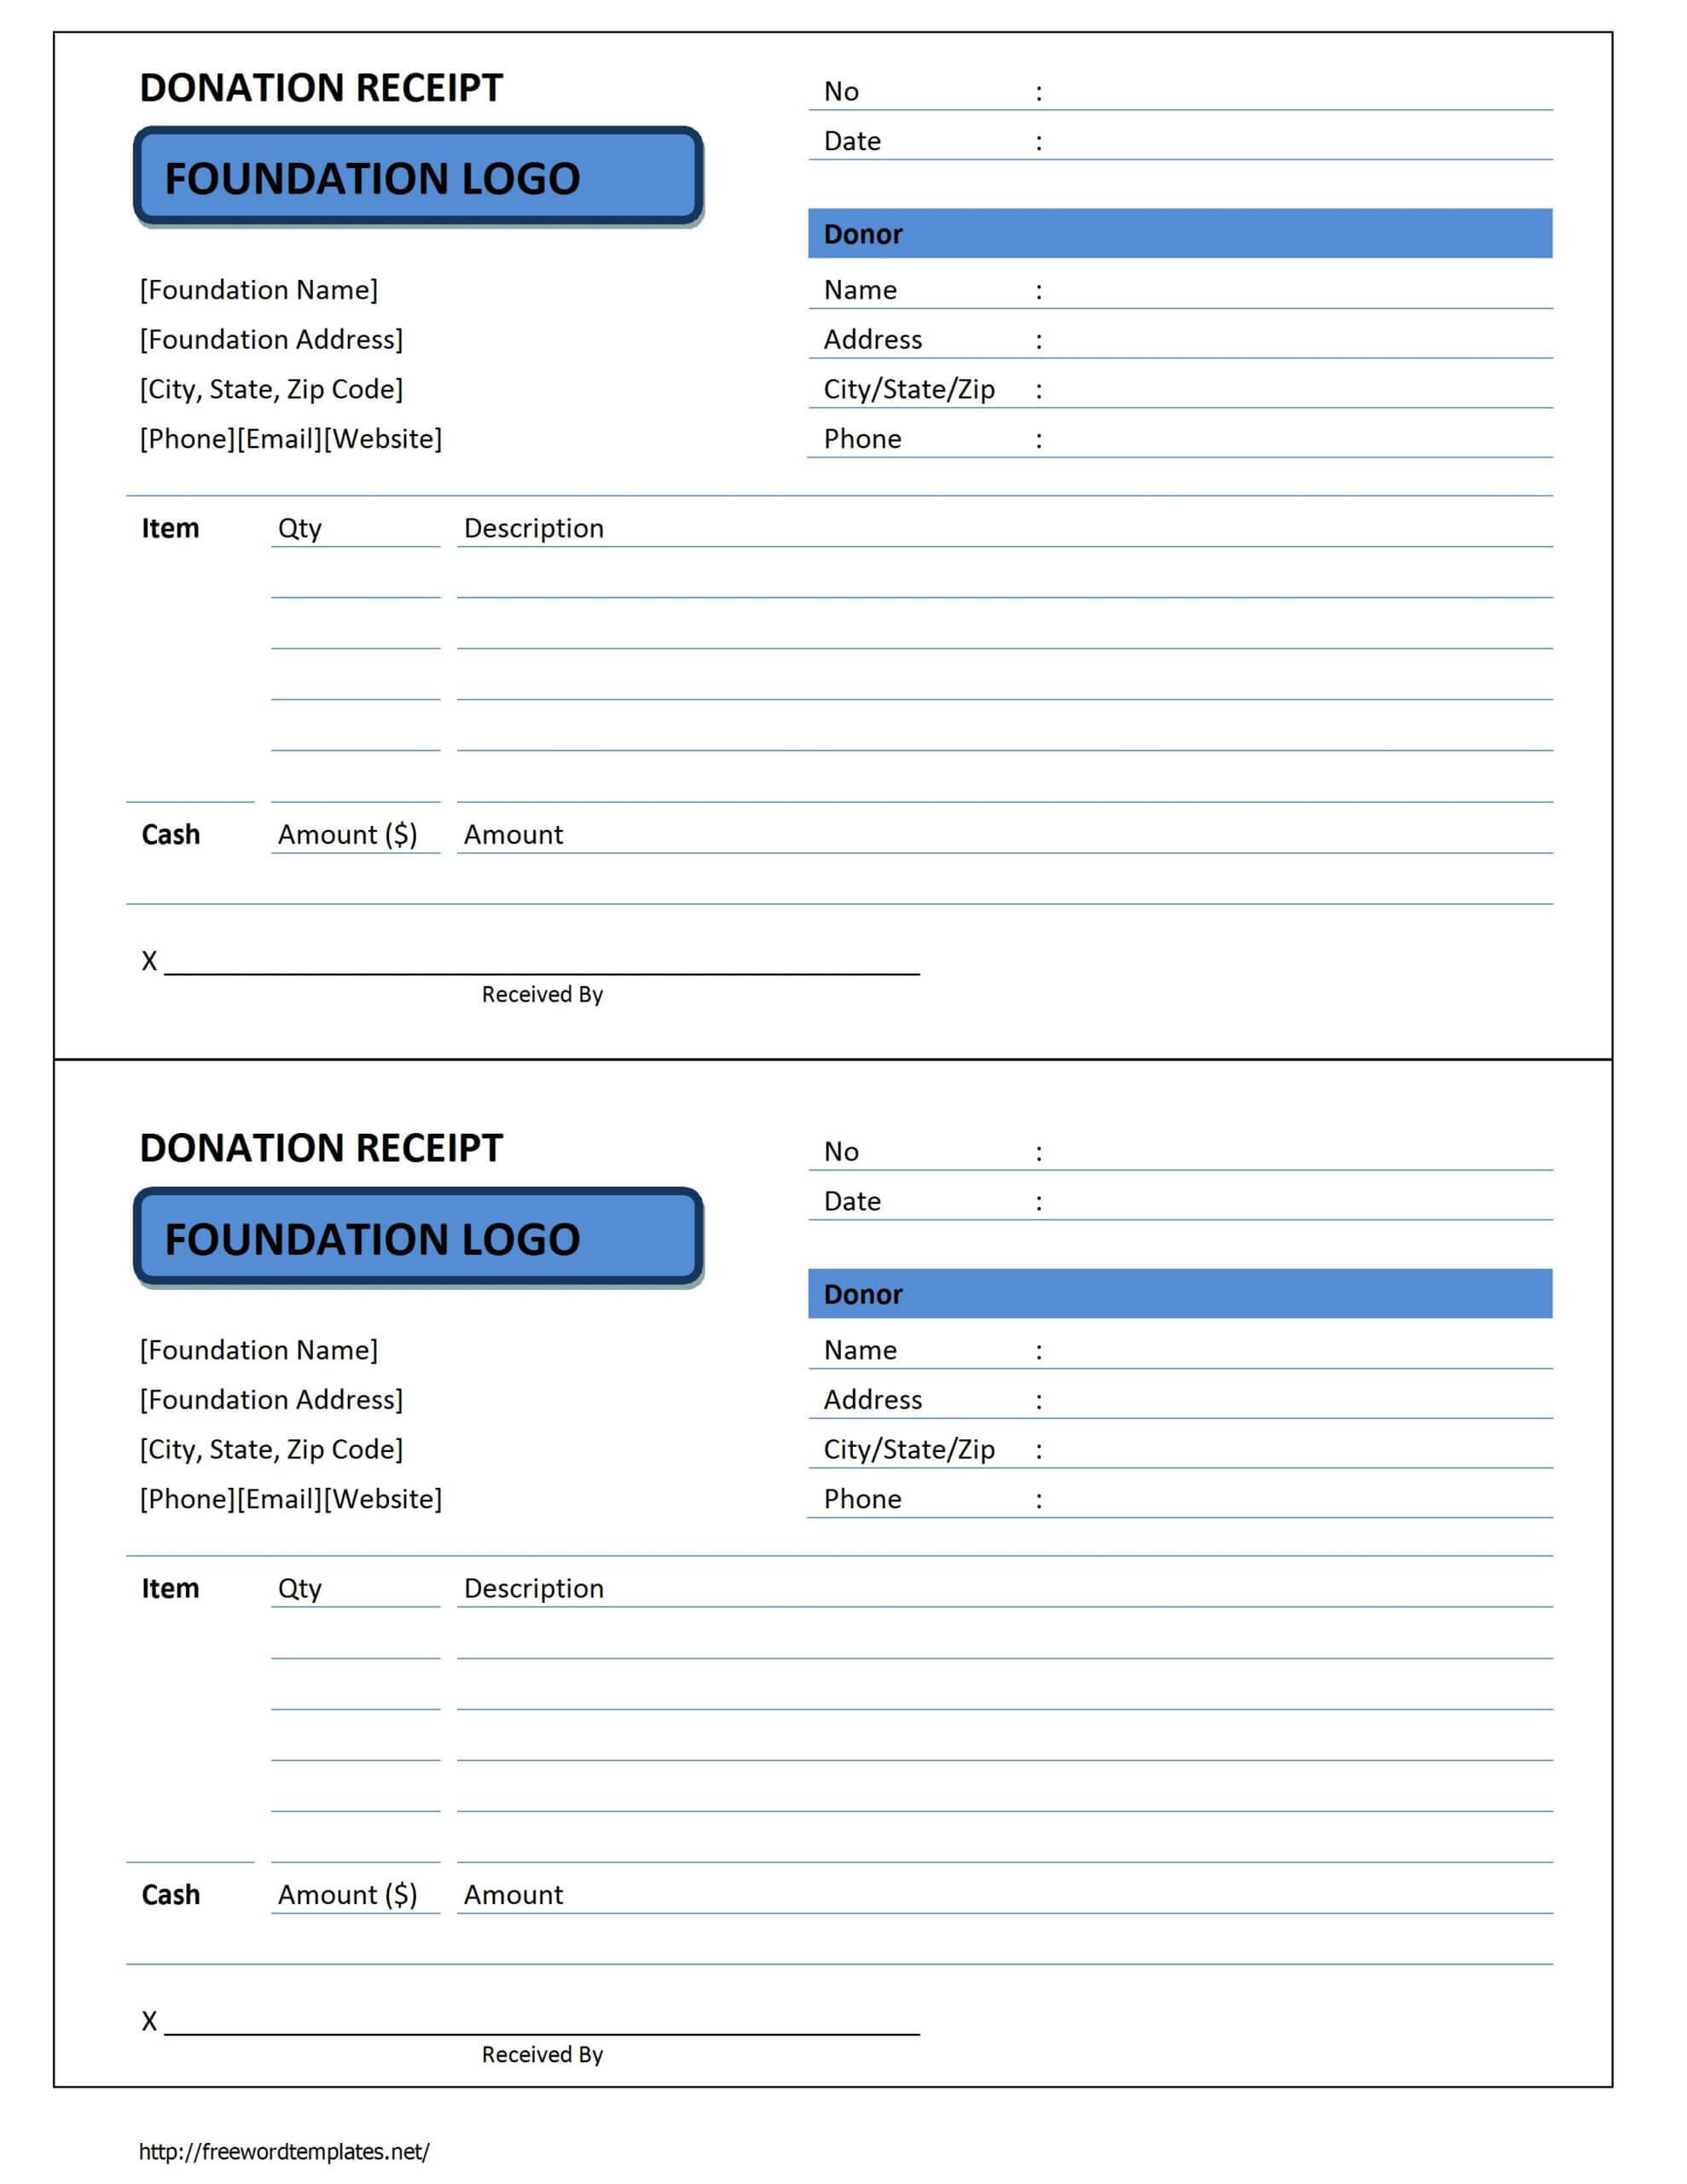 Pinberty Zulfianna On Share | Receipt Template, Invoice With Regard To Donation Report Template